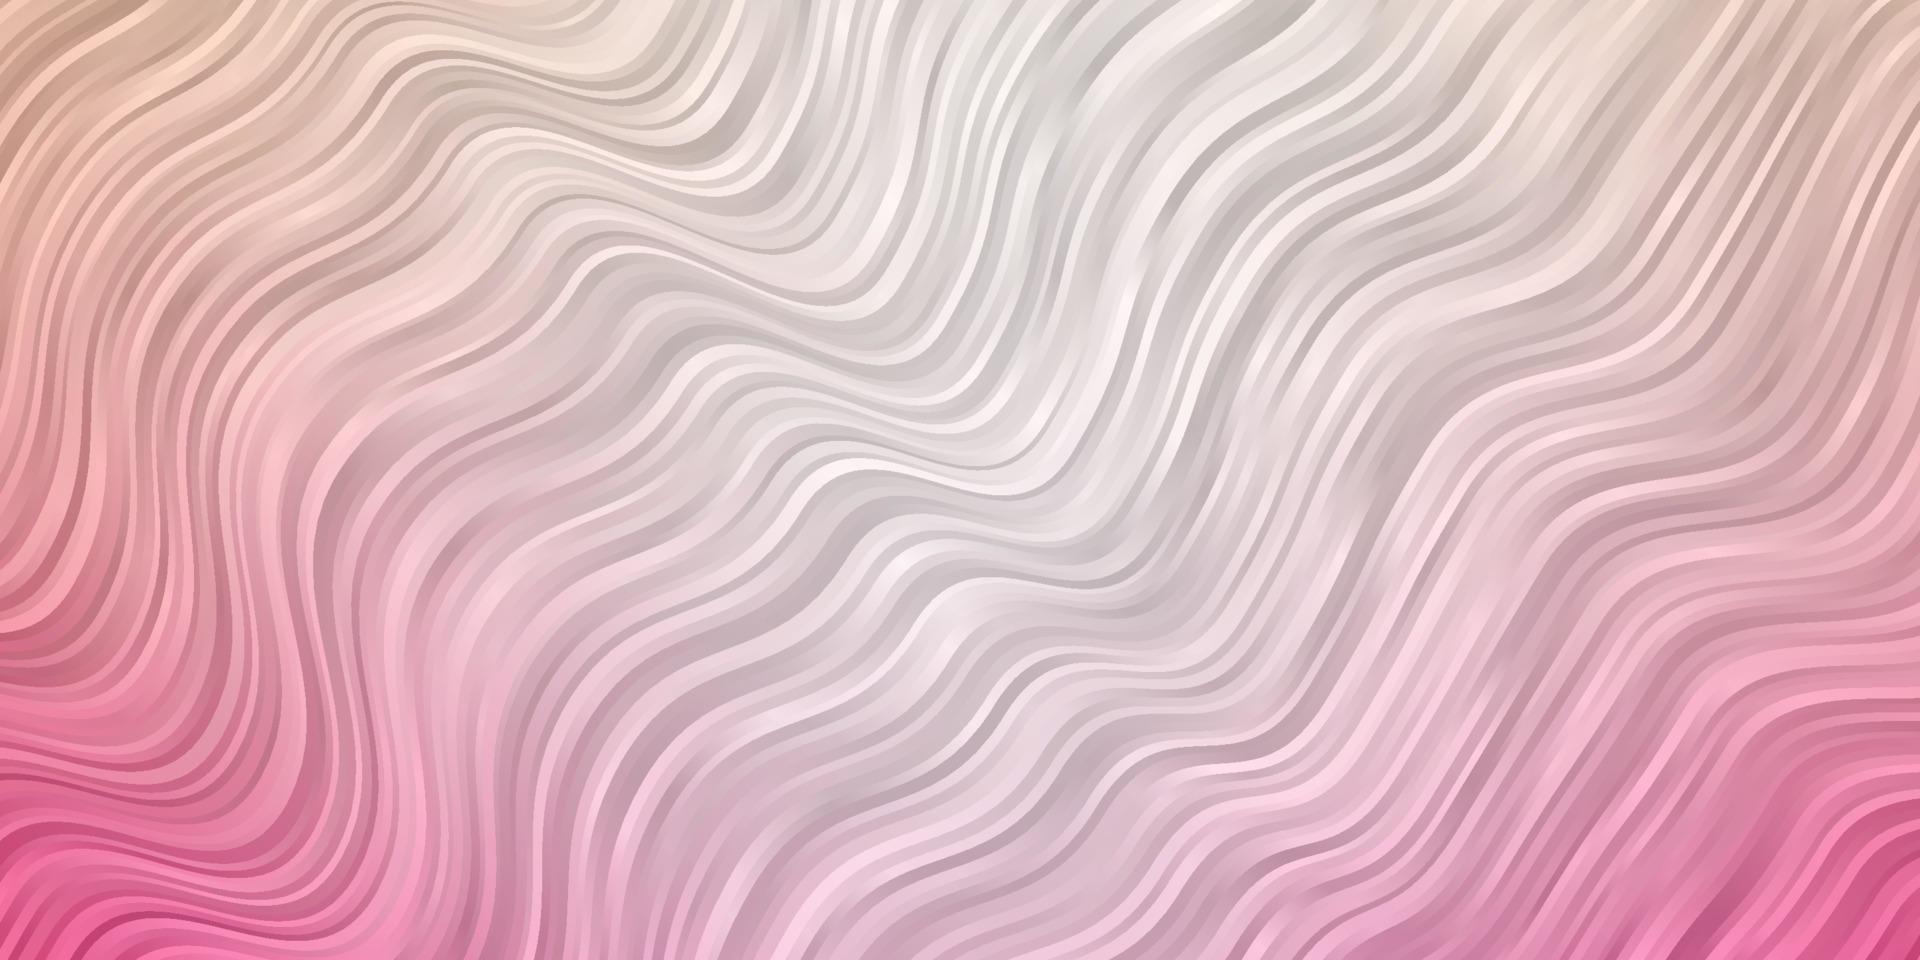 Light Pink vector texture with curves.